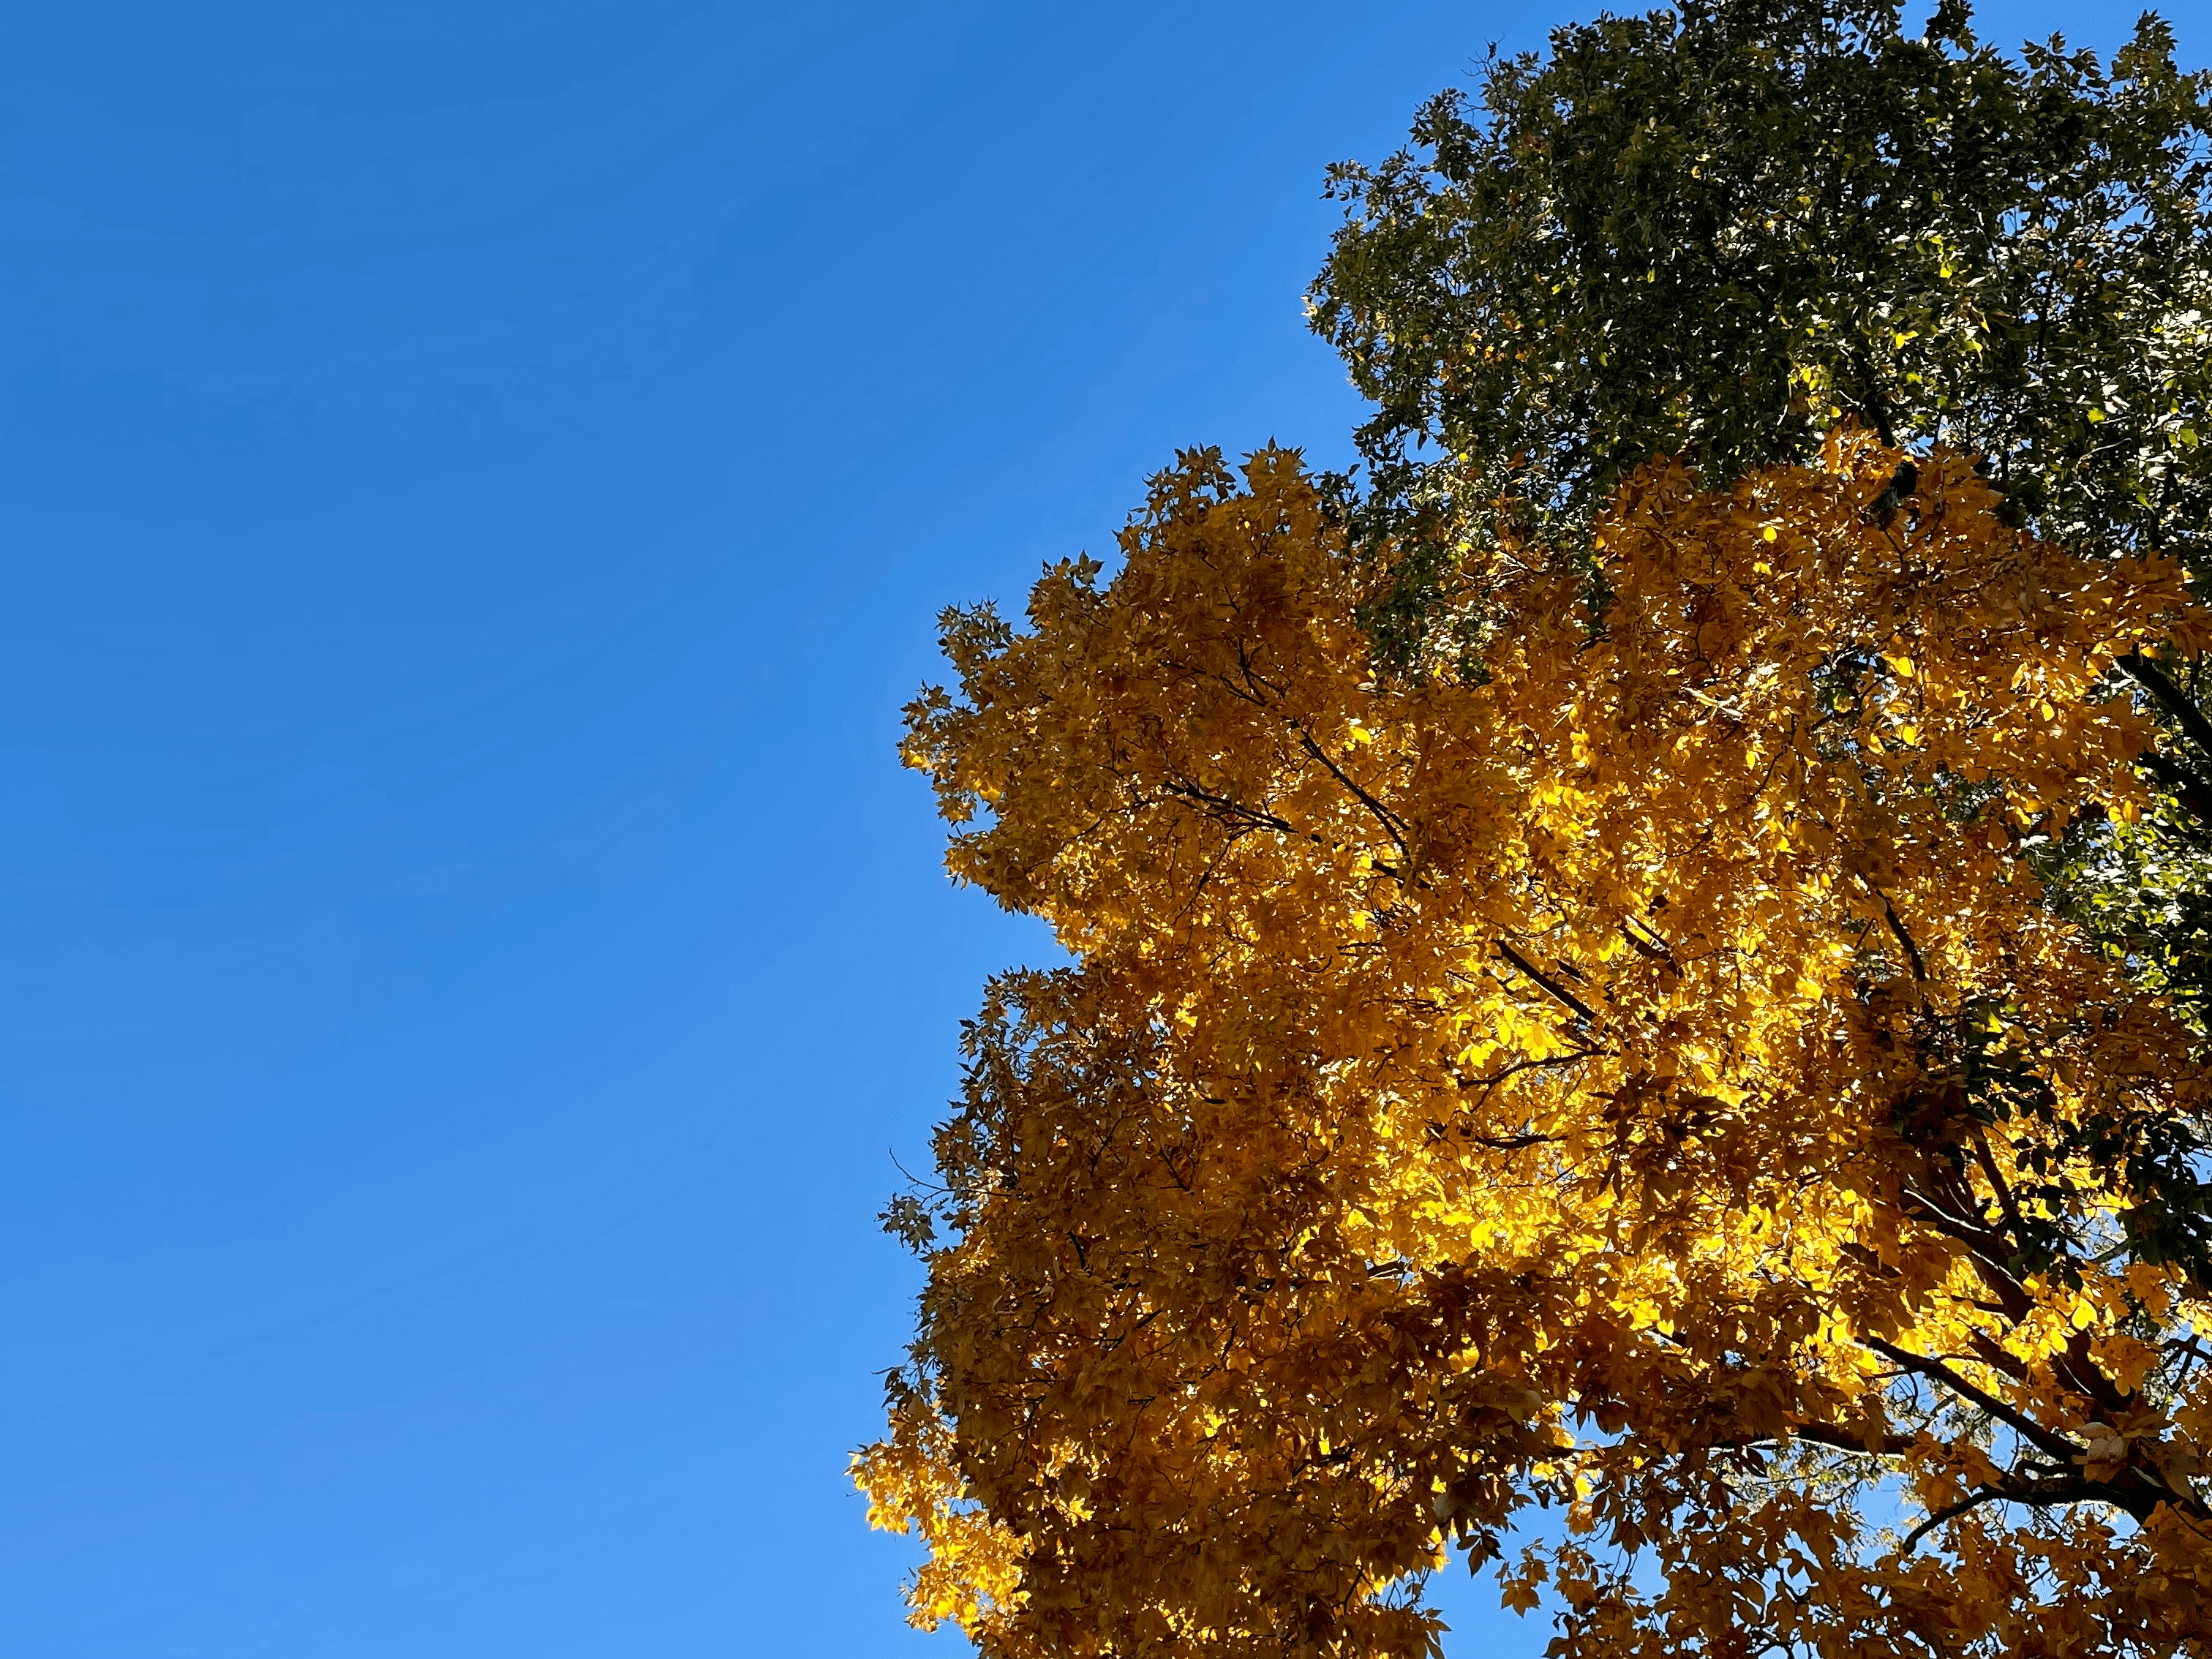 Tree with both green and orange leaves under a blue sky